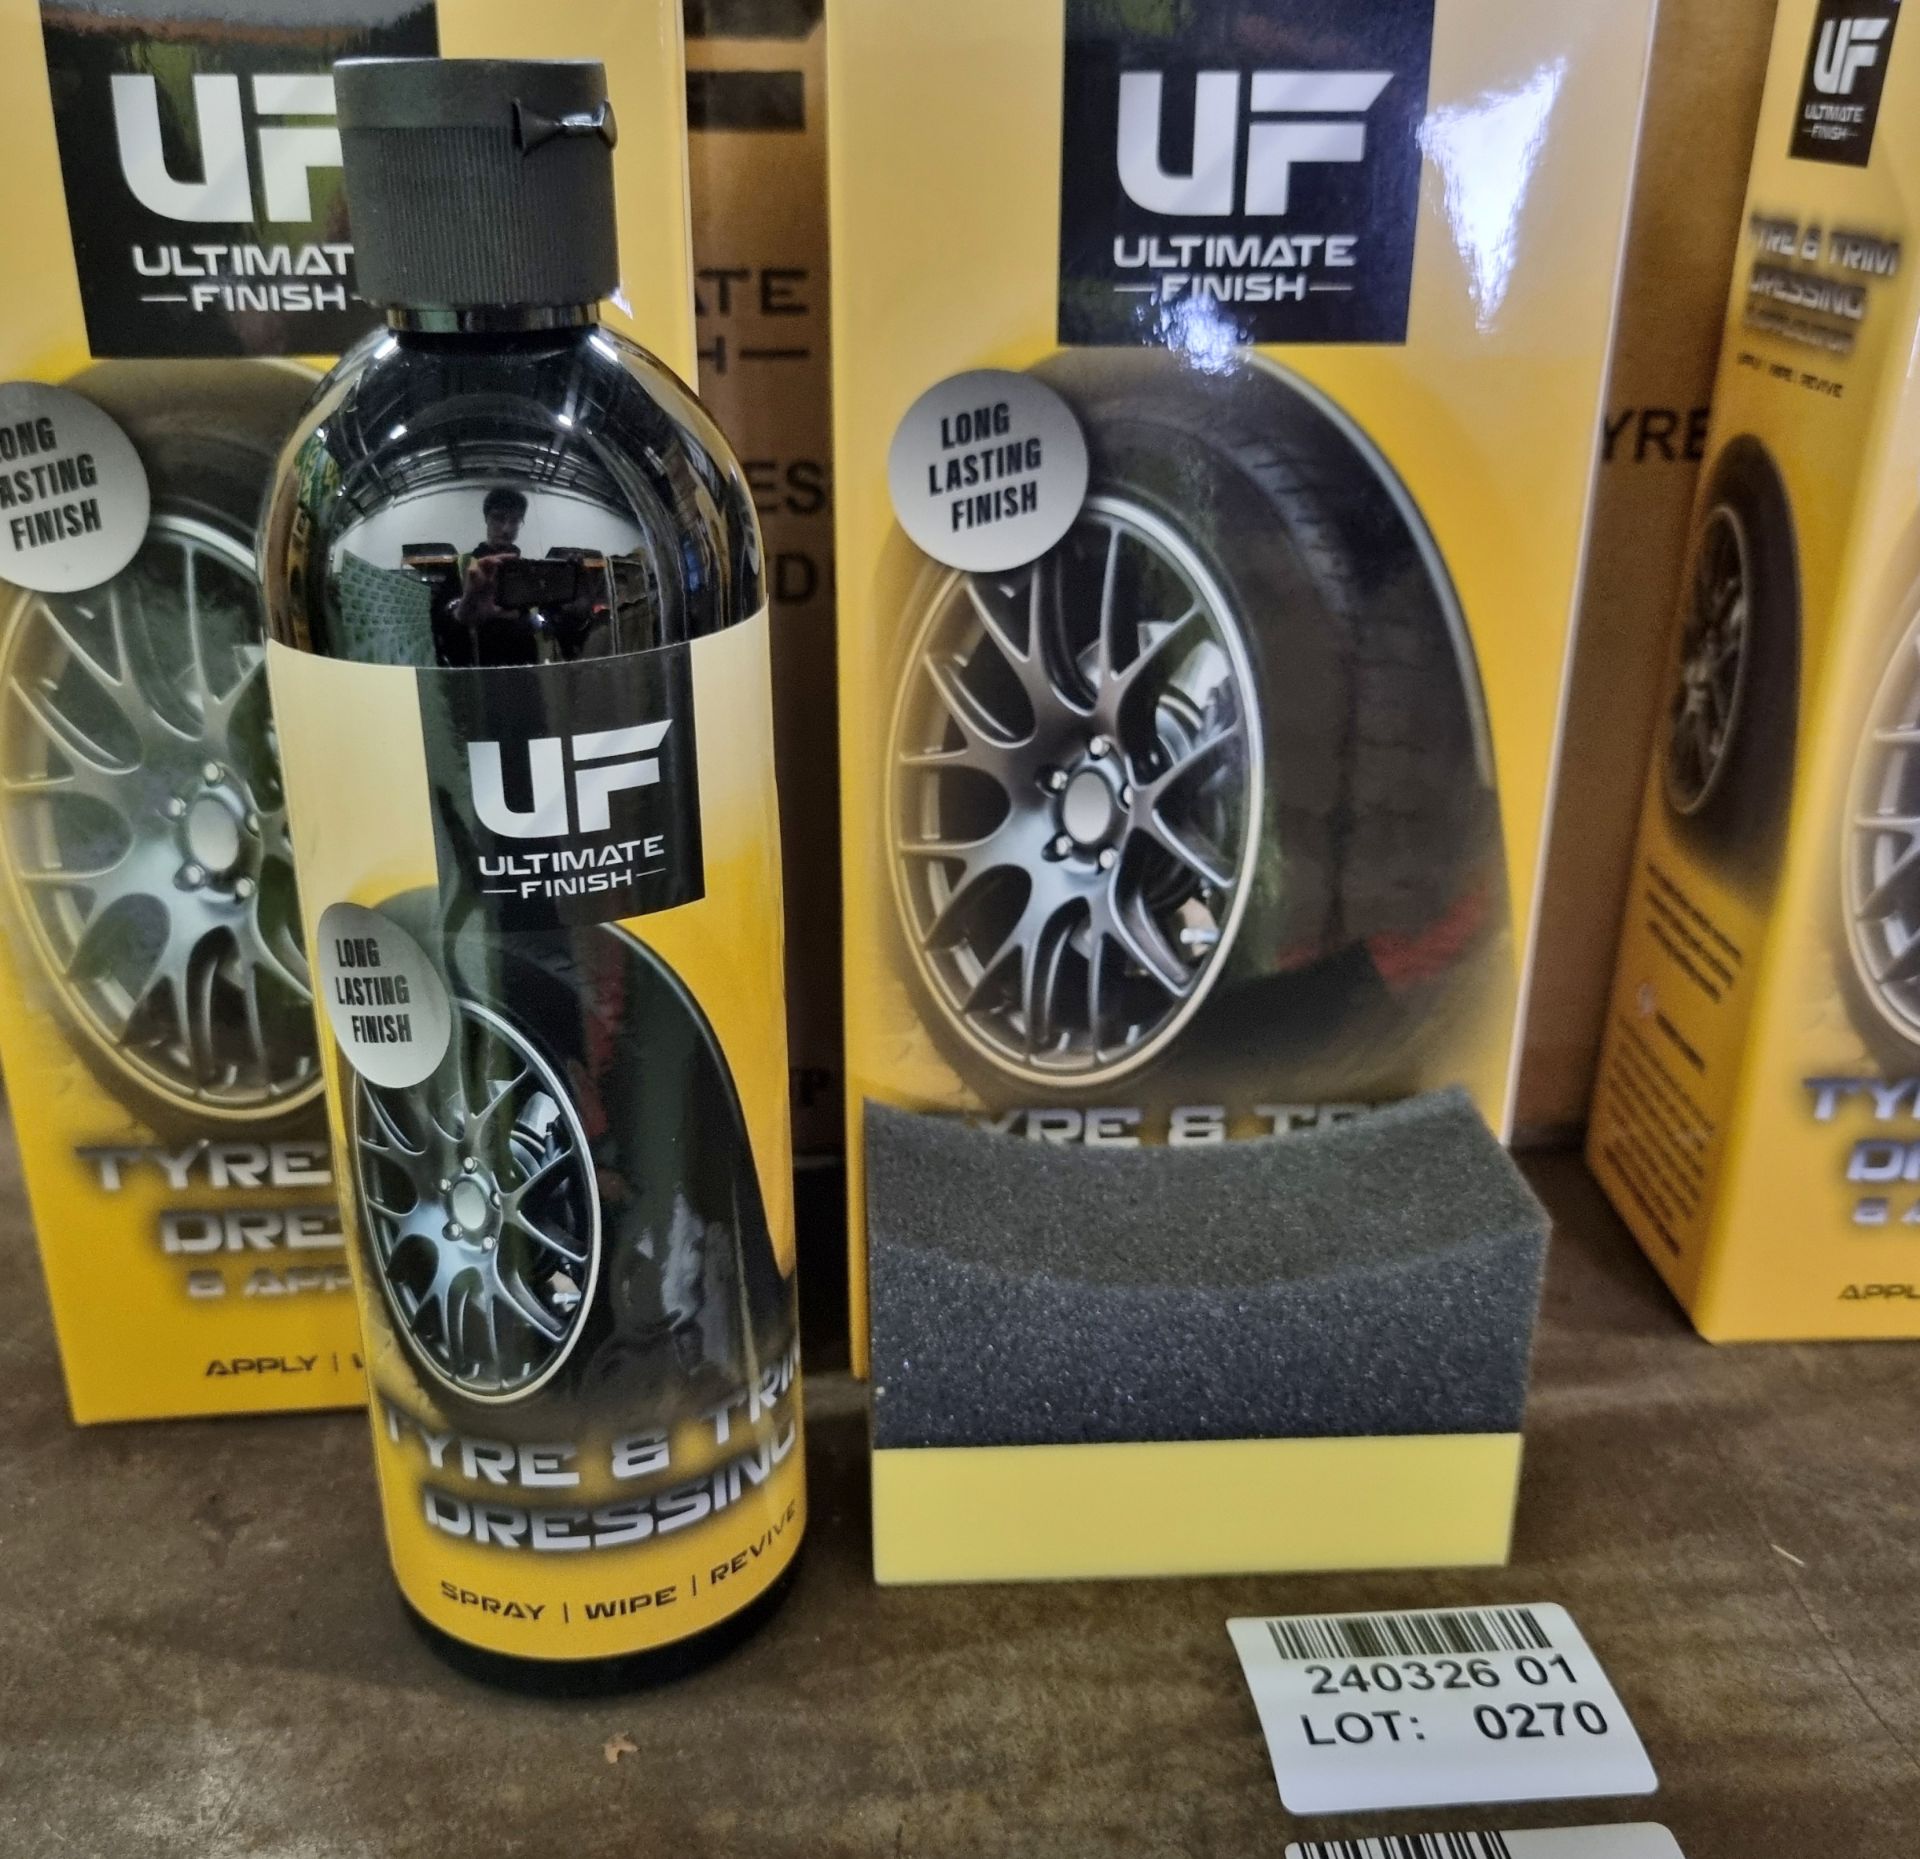 51x Ultimate Finish tyre & trim dressing kits (473ml bottle and applicator per pack) - Image 3 of 6